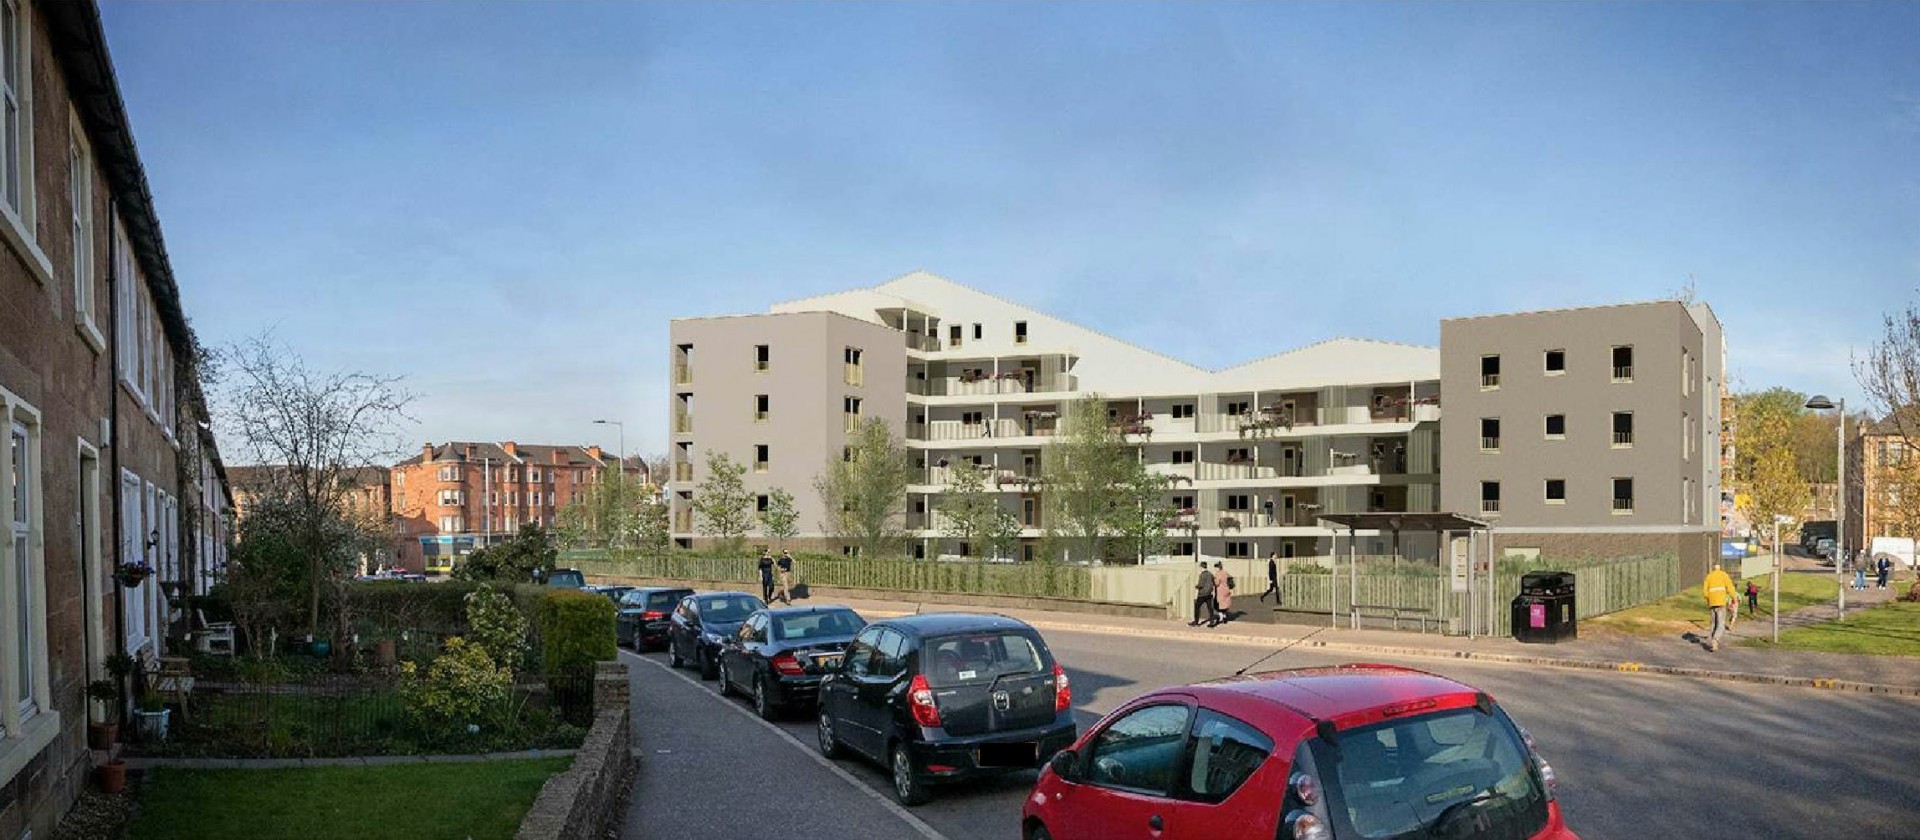 Sanctuary given green light for over 55s development in Glasgow